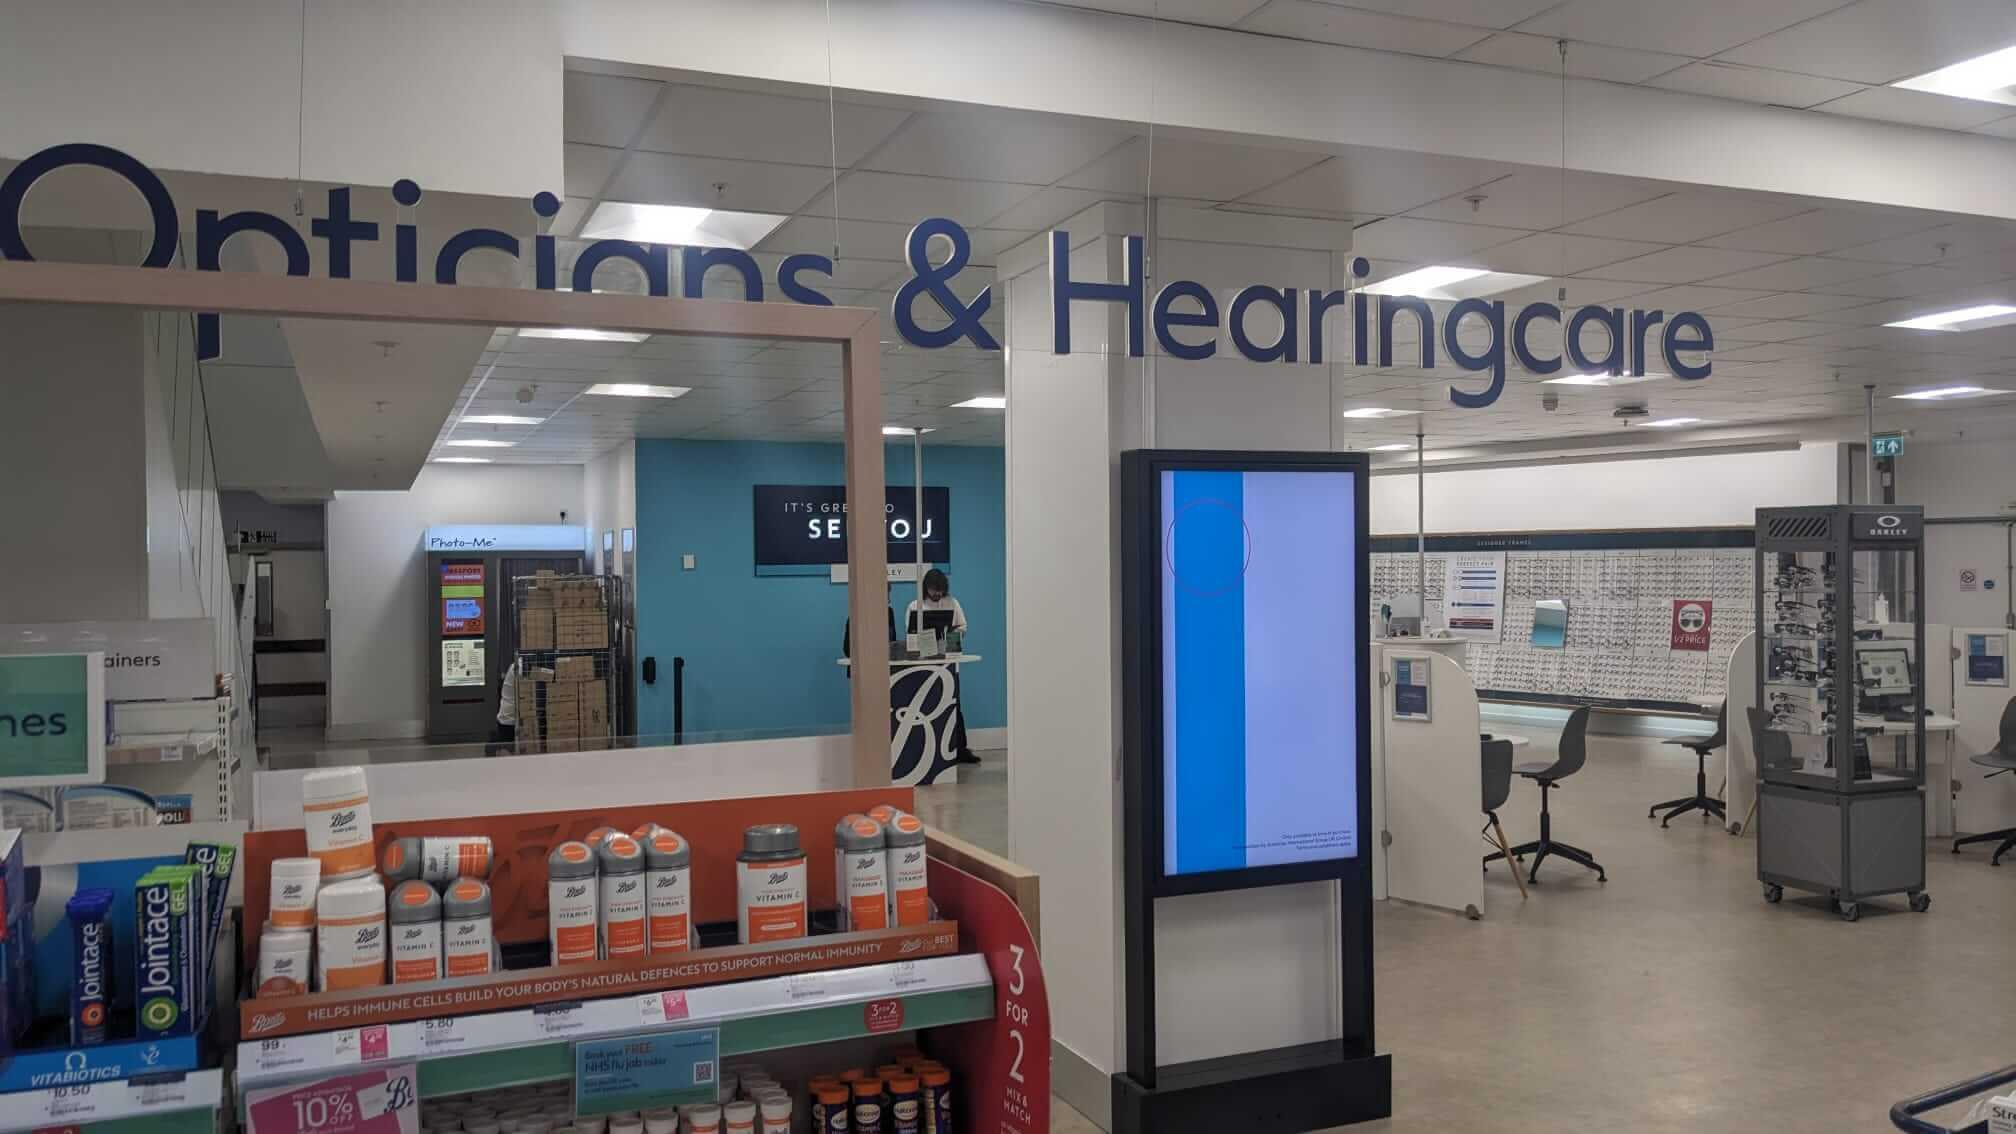 Boots Hearingcare Boots Hearingcare Bromley Bromley 03452 701600